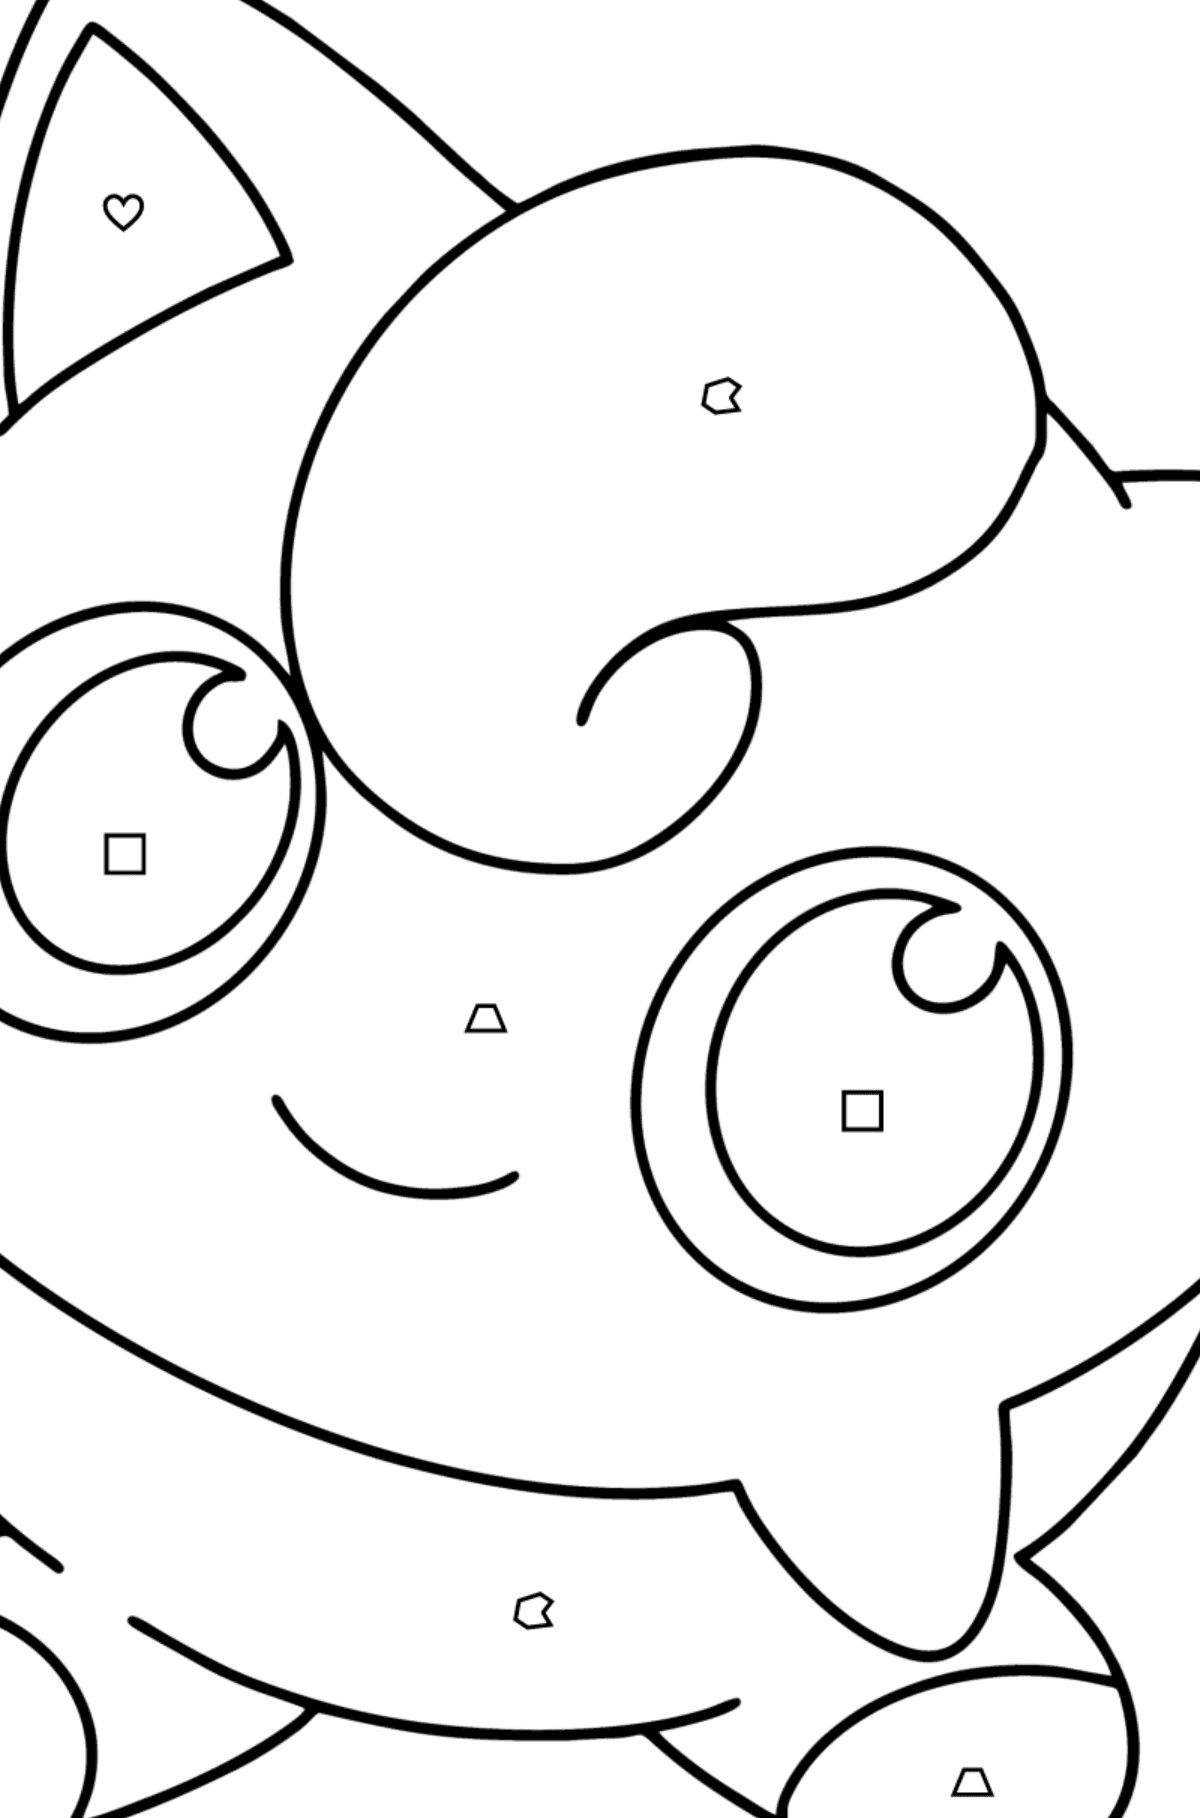 Coloring page Pokémon Go Jigglypuff - Coloring by Geometric Shapes for Kids